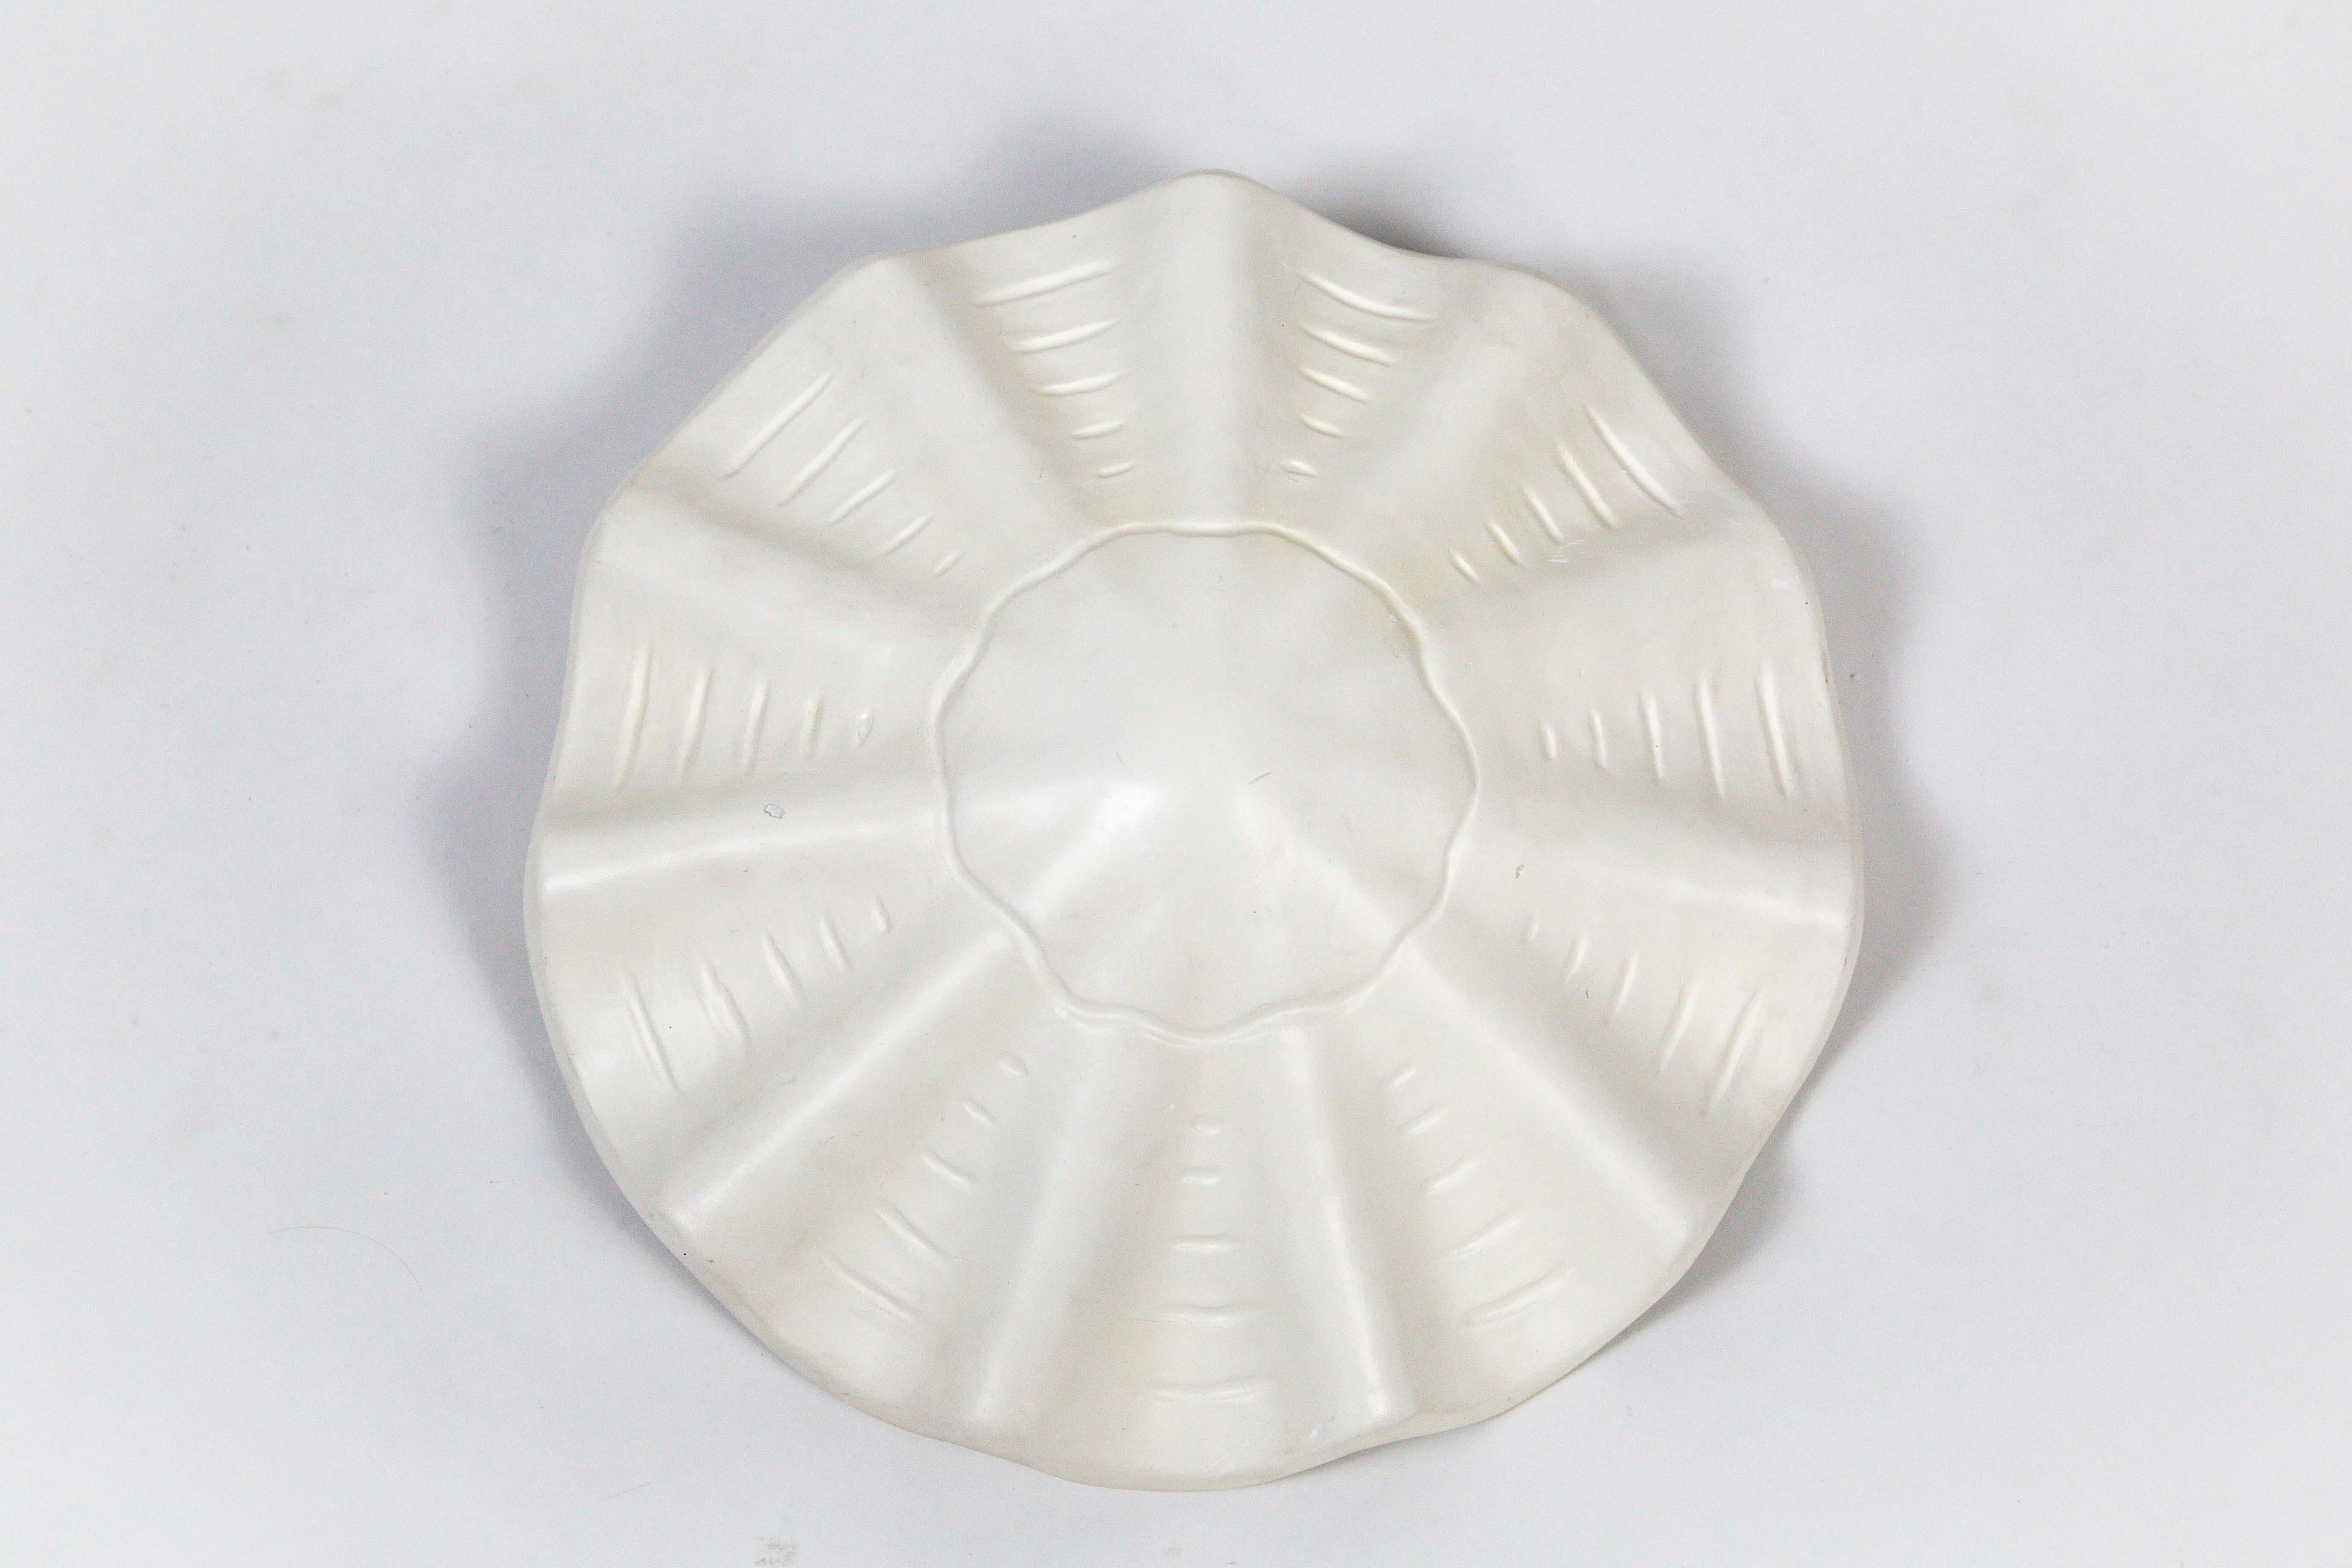 A white, lacquered plaster pendant in an undulating shell shape, with scalloped edges and imprinted lines accentuating the form. A newer take on Francis Elkins's 1940s plaster plafonnier, this later version was produced in the 1960s and 1970s by